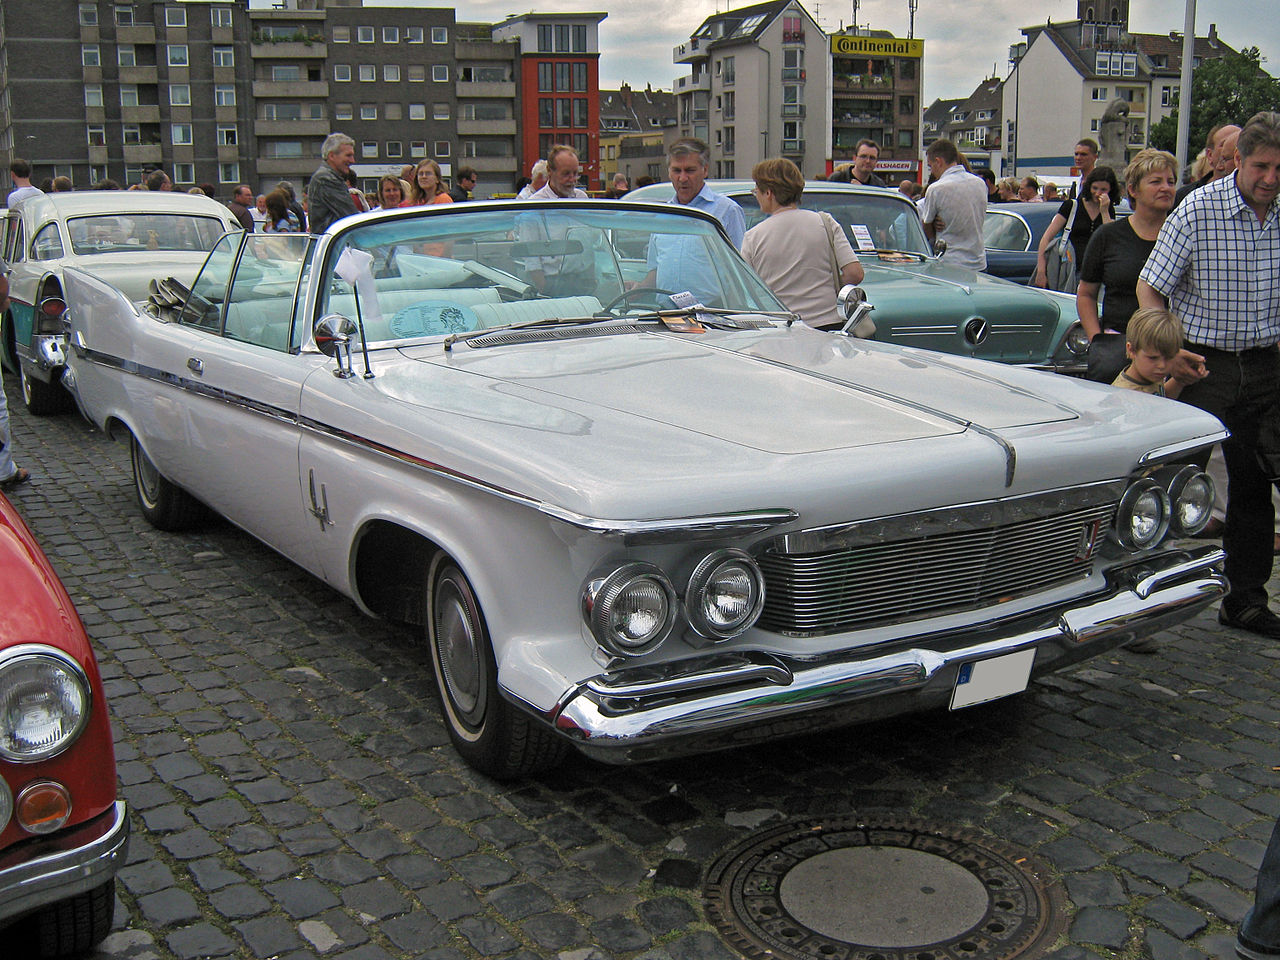 File:1961 Imperial Crown Cabrio Front.jpg - Wikimedia Commons